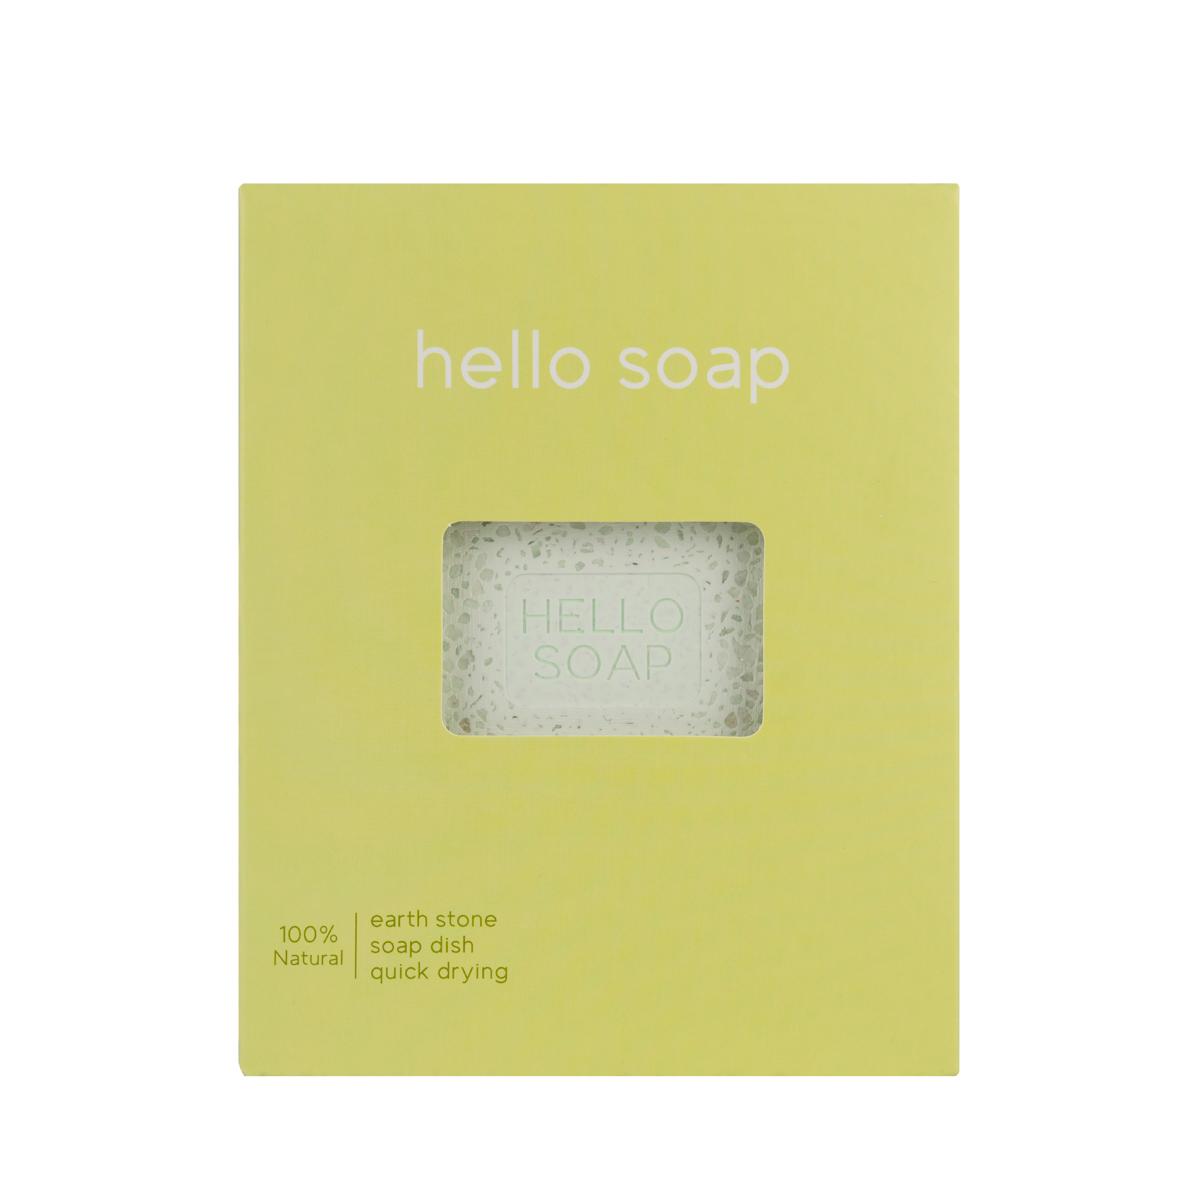 Primary image of Green Hello Soap Holder